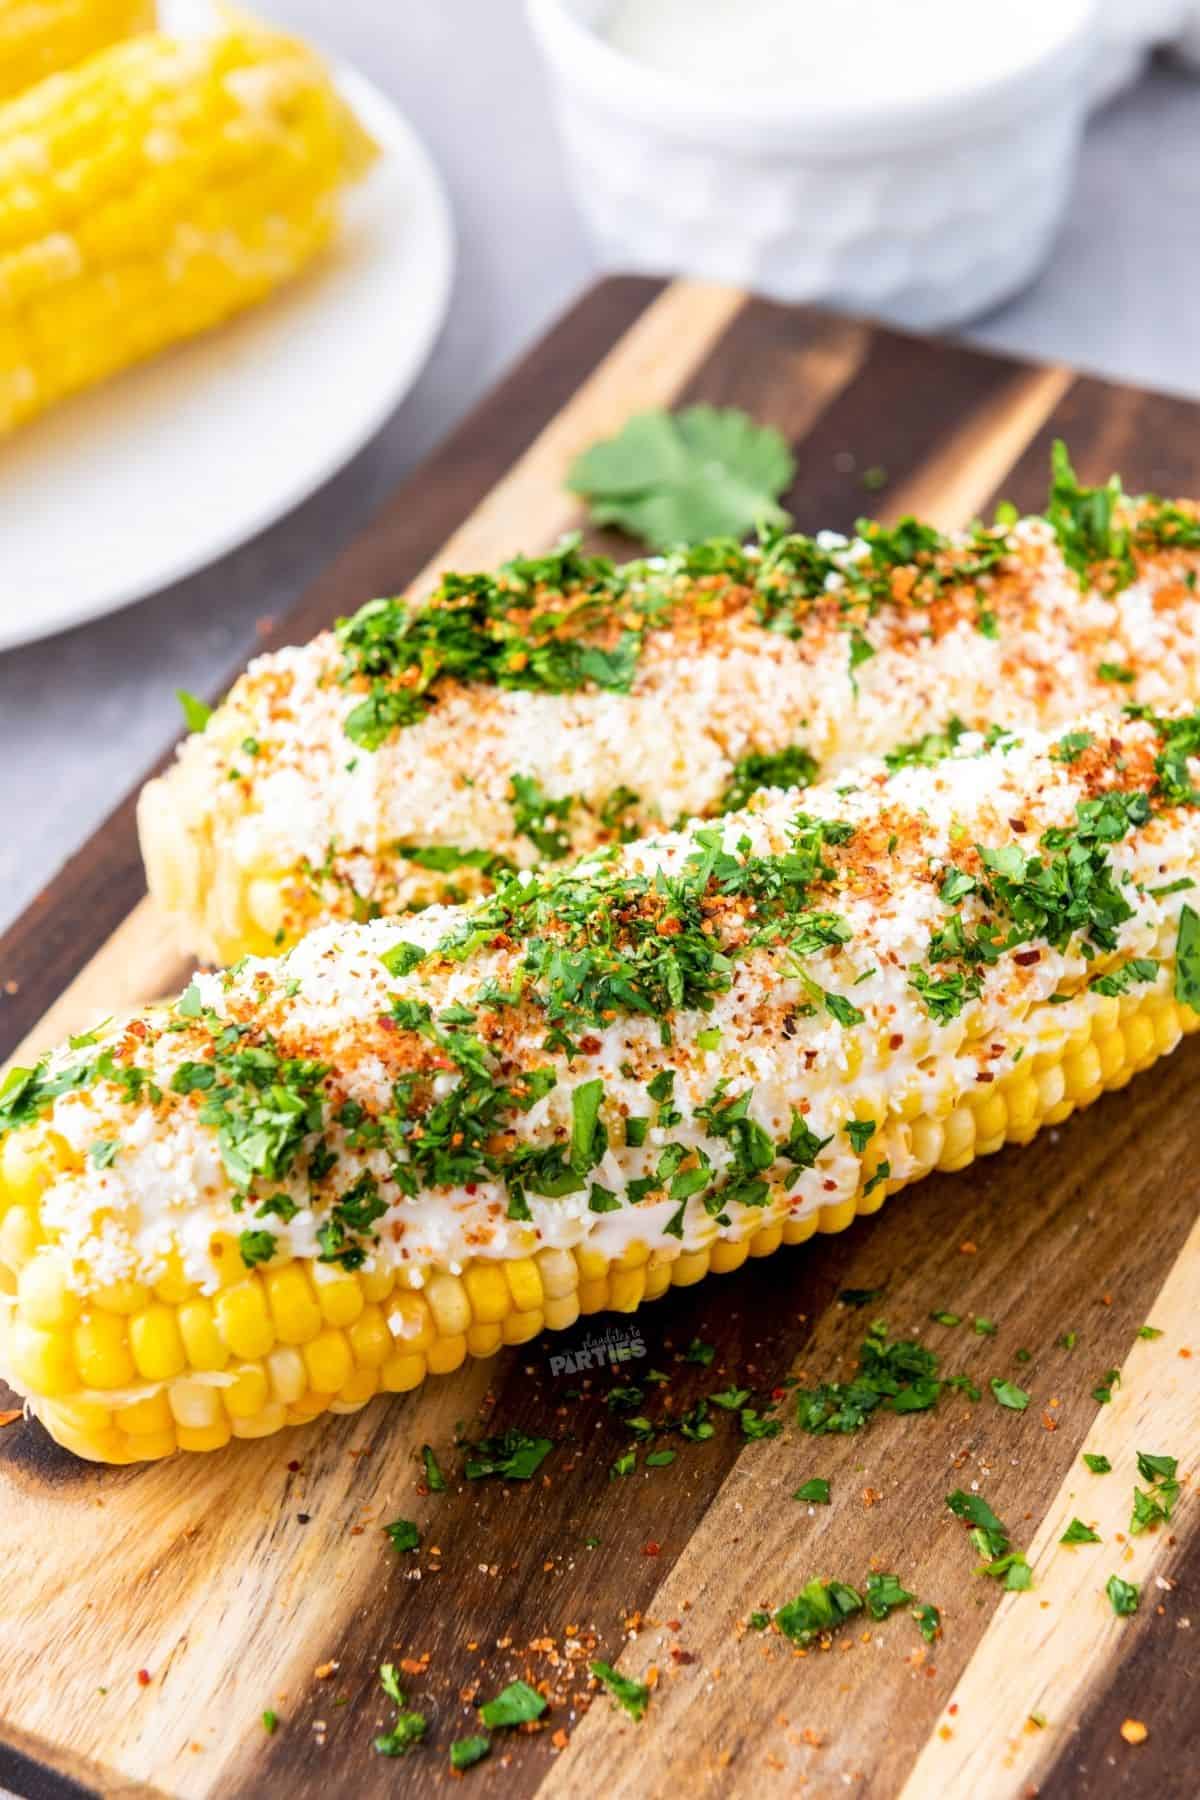 Corn on the cob coated with Mexican crema sauce, cheese, and seasonings.